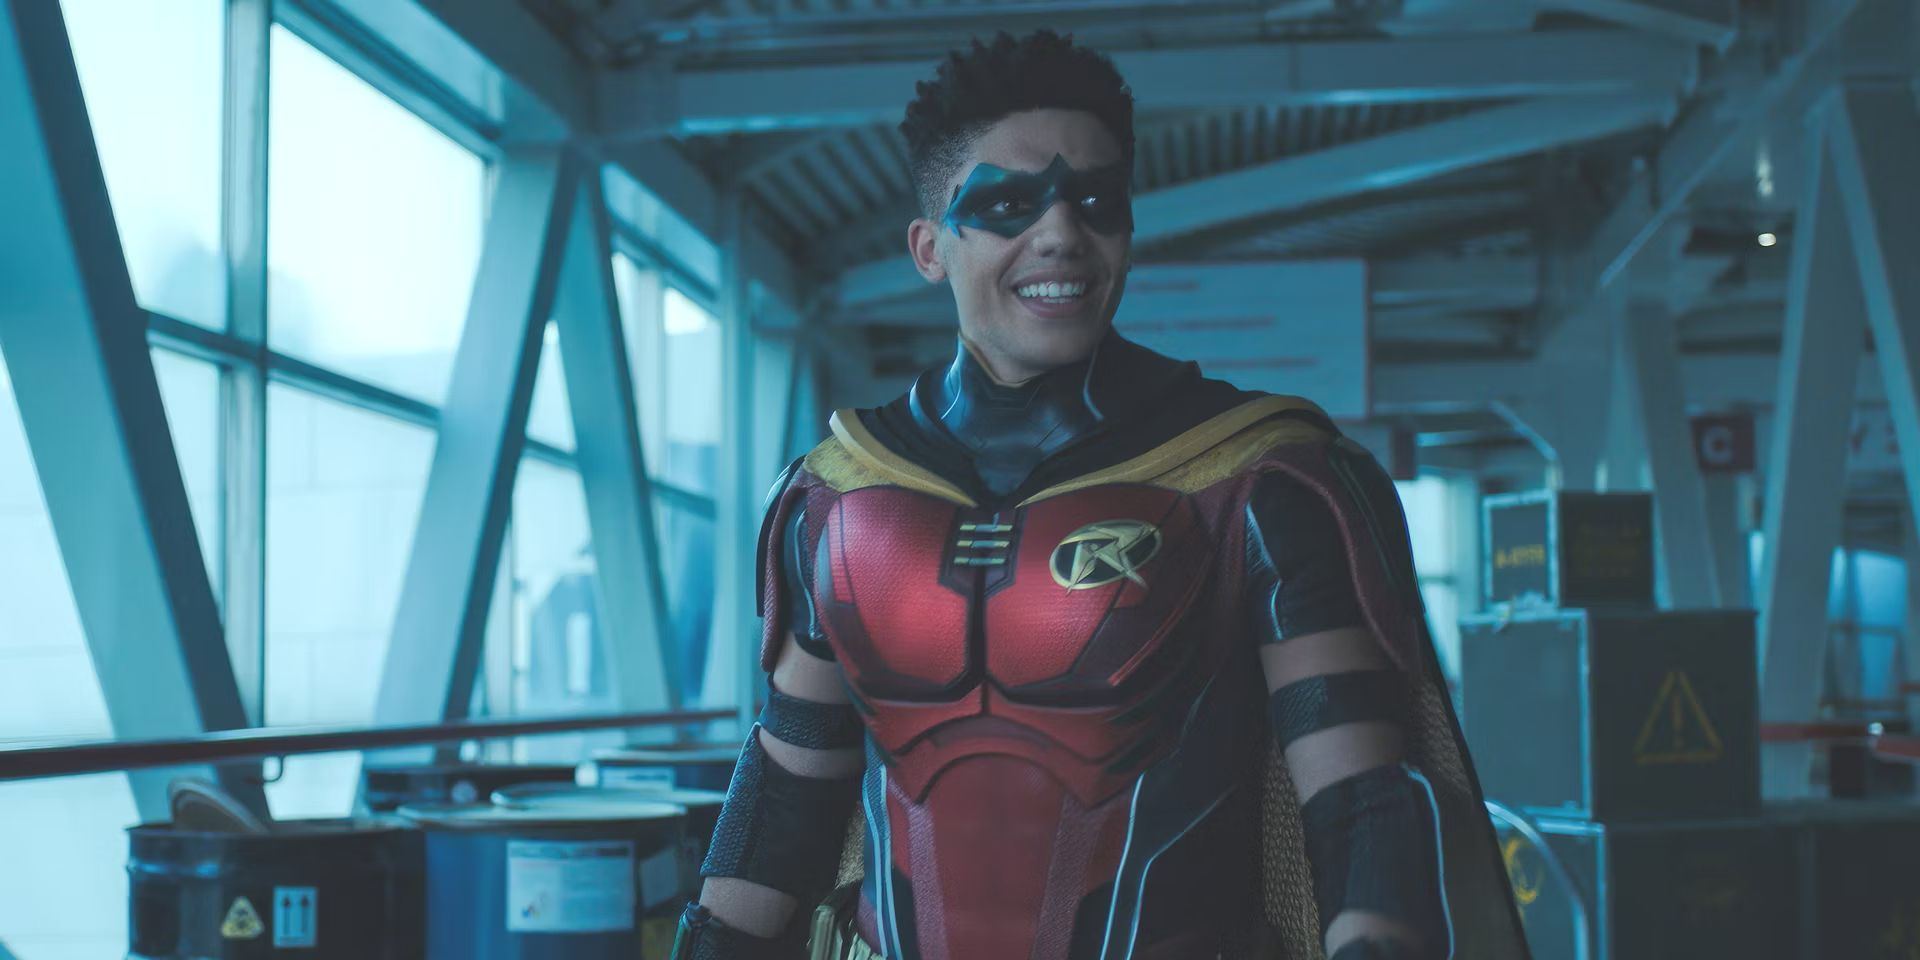 Titans' Jay Lycurgo as Robin, smiling in costume